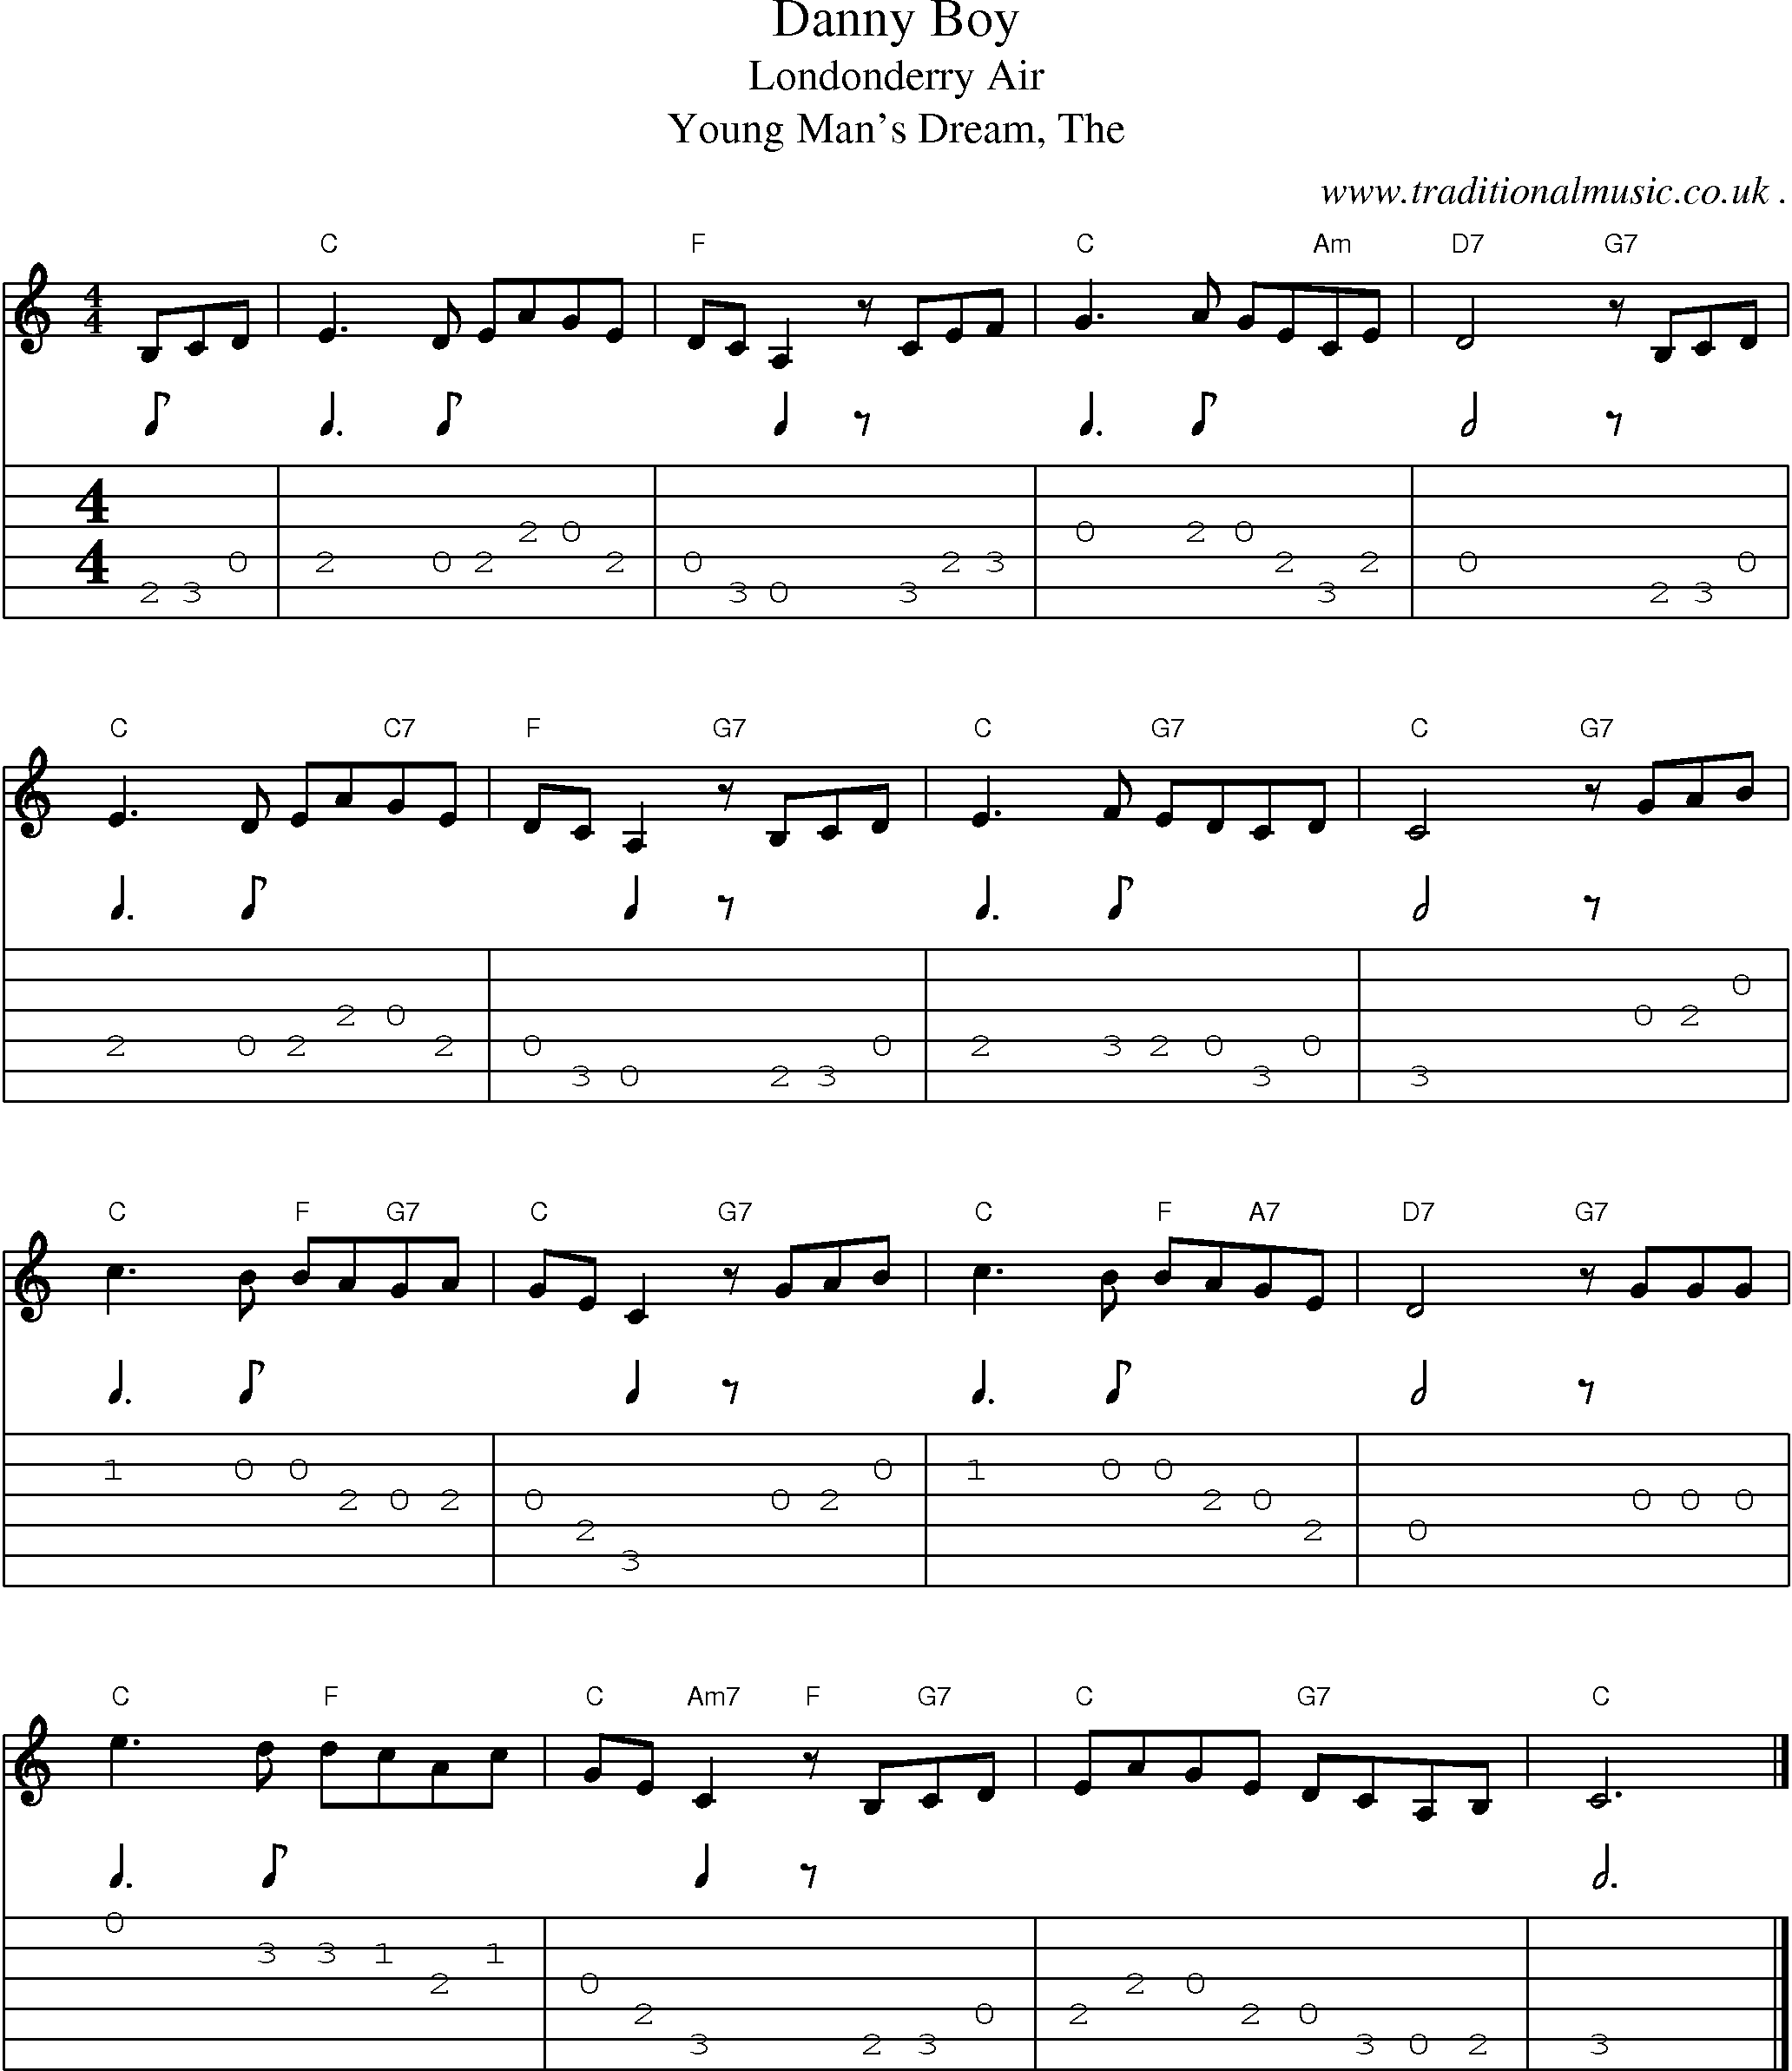 Music Score and Guitar Tabs for Danny Boy